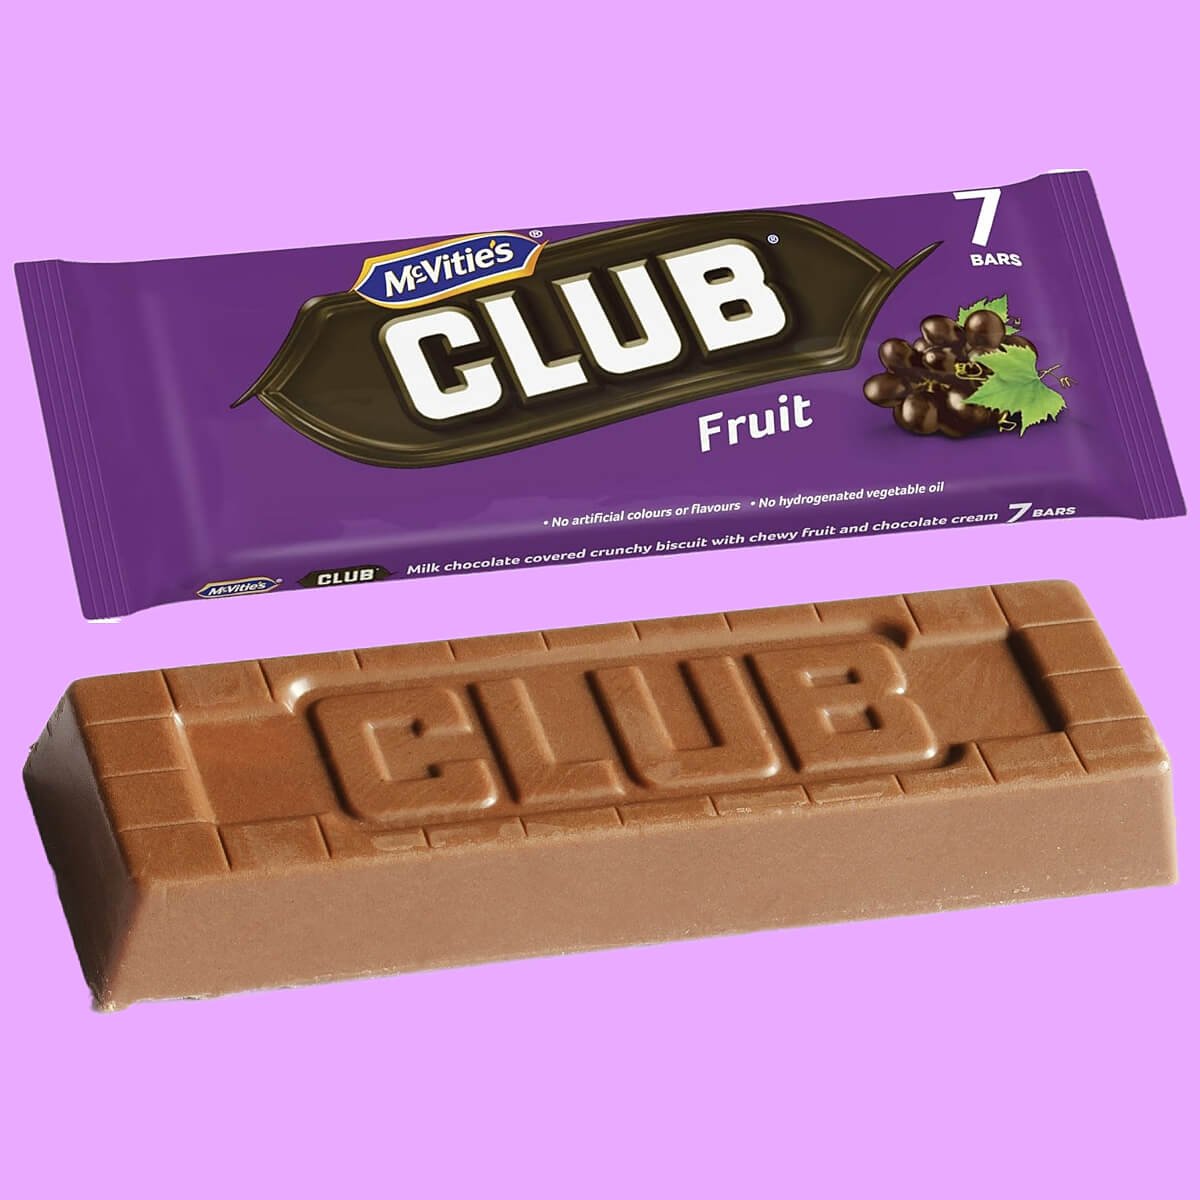 McVitie's Fruit Club pack of 7, with unwrapped biscuit enlarged 